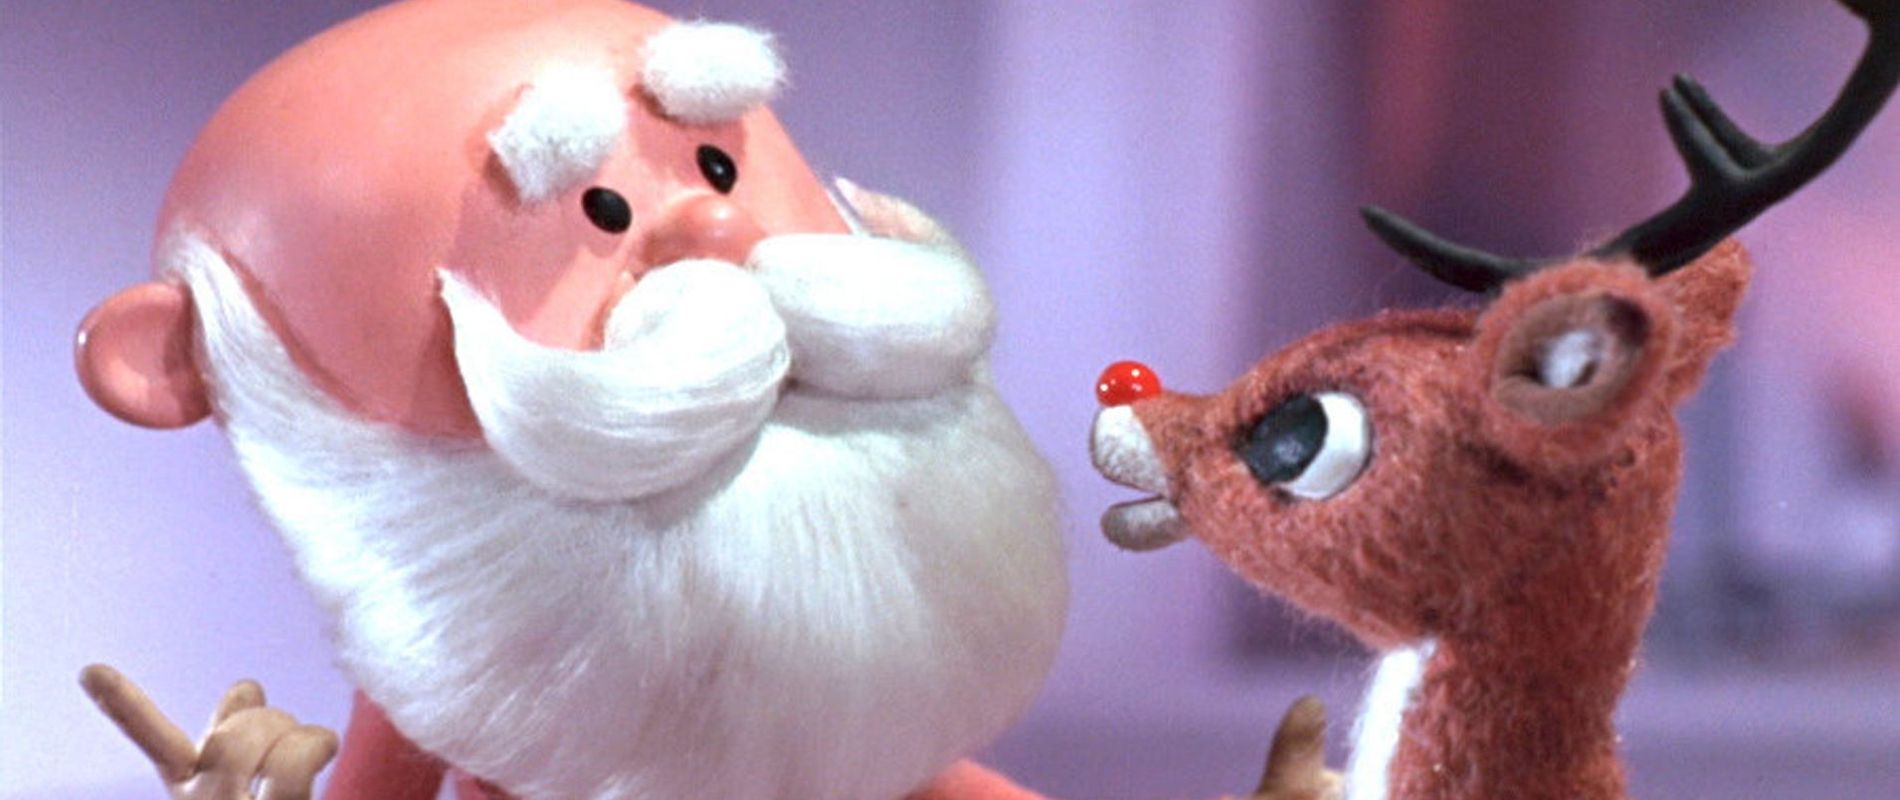 A still from the 1964 Christmas classic film Rudolph the Red Nosed Reindeer.